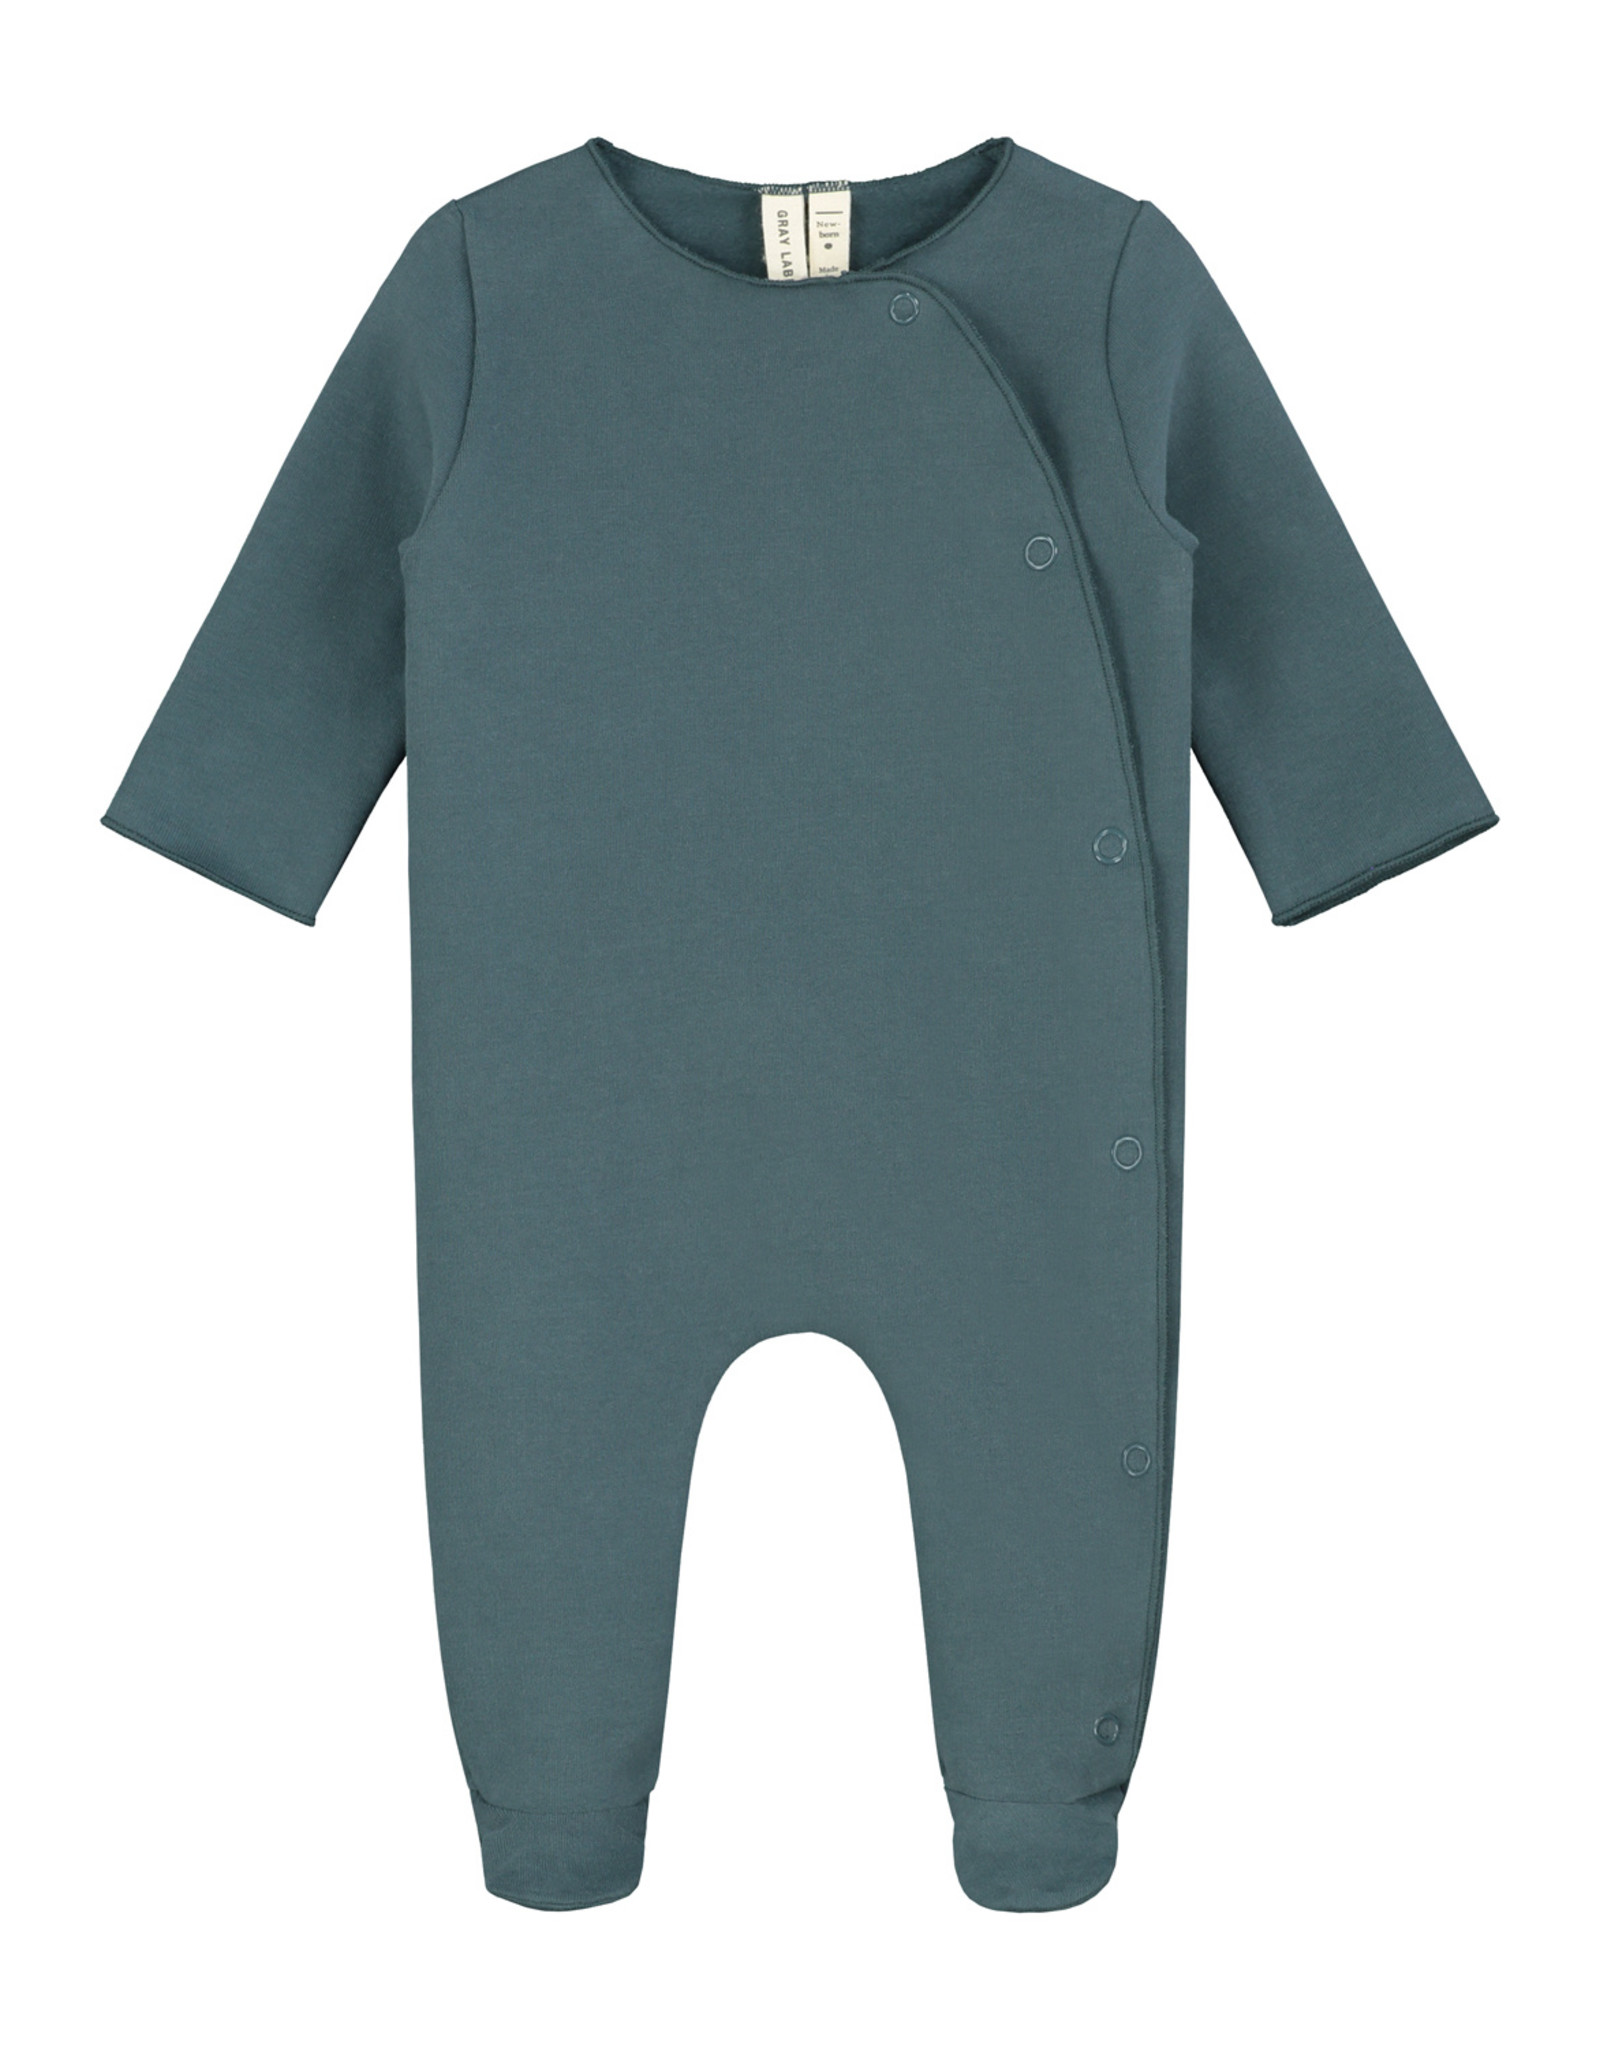 Gray Label Newborn Suit with snaps